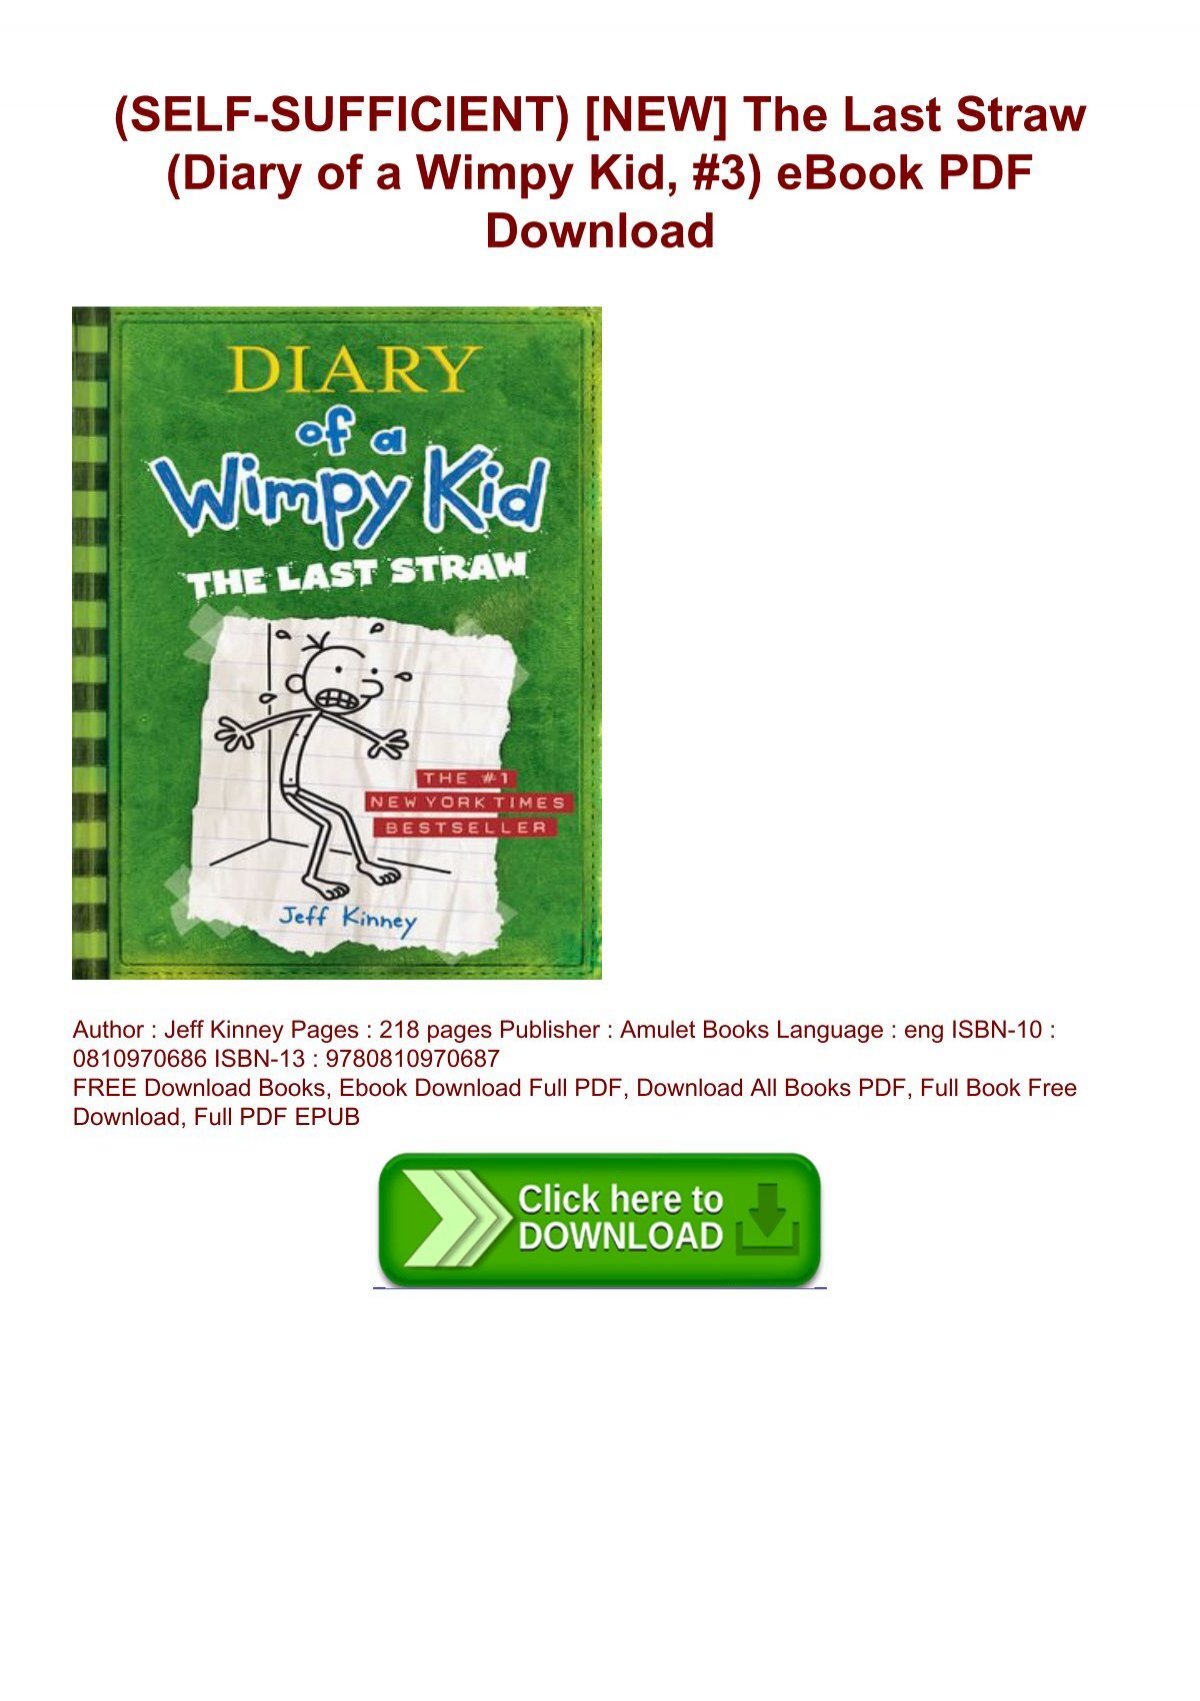 Self Sufficient New The Last Straw Diary Of A Wimpy Kid 3 Ebook Pdf Download